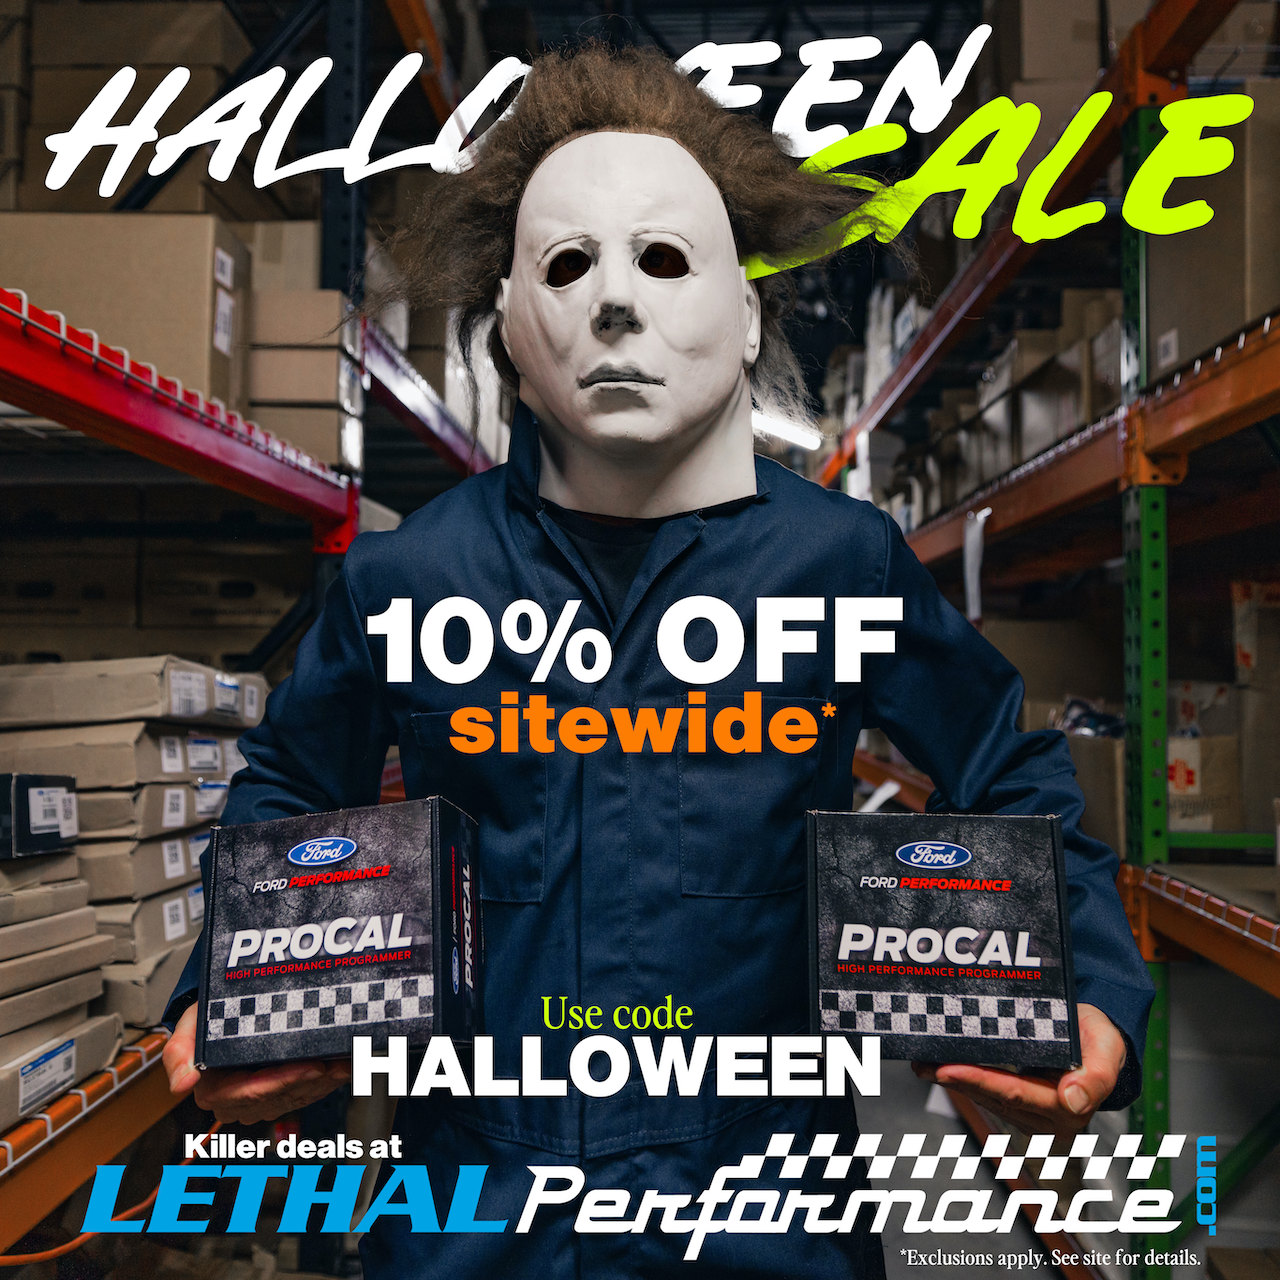 Ford Bronco Lethal Performance SITEWIDE Halloween Sale! halloweensale7 (1)